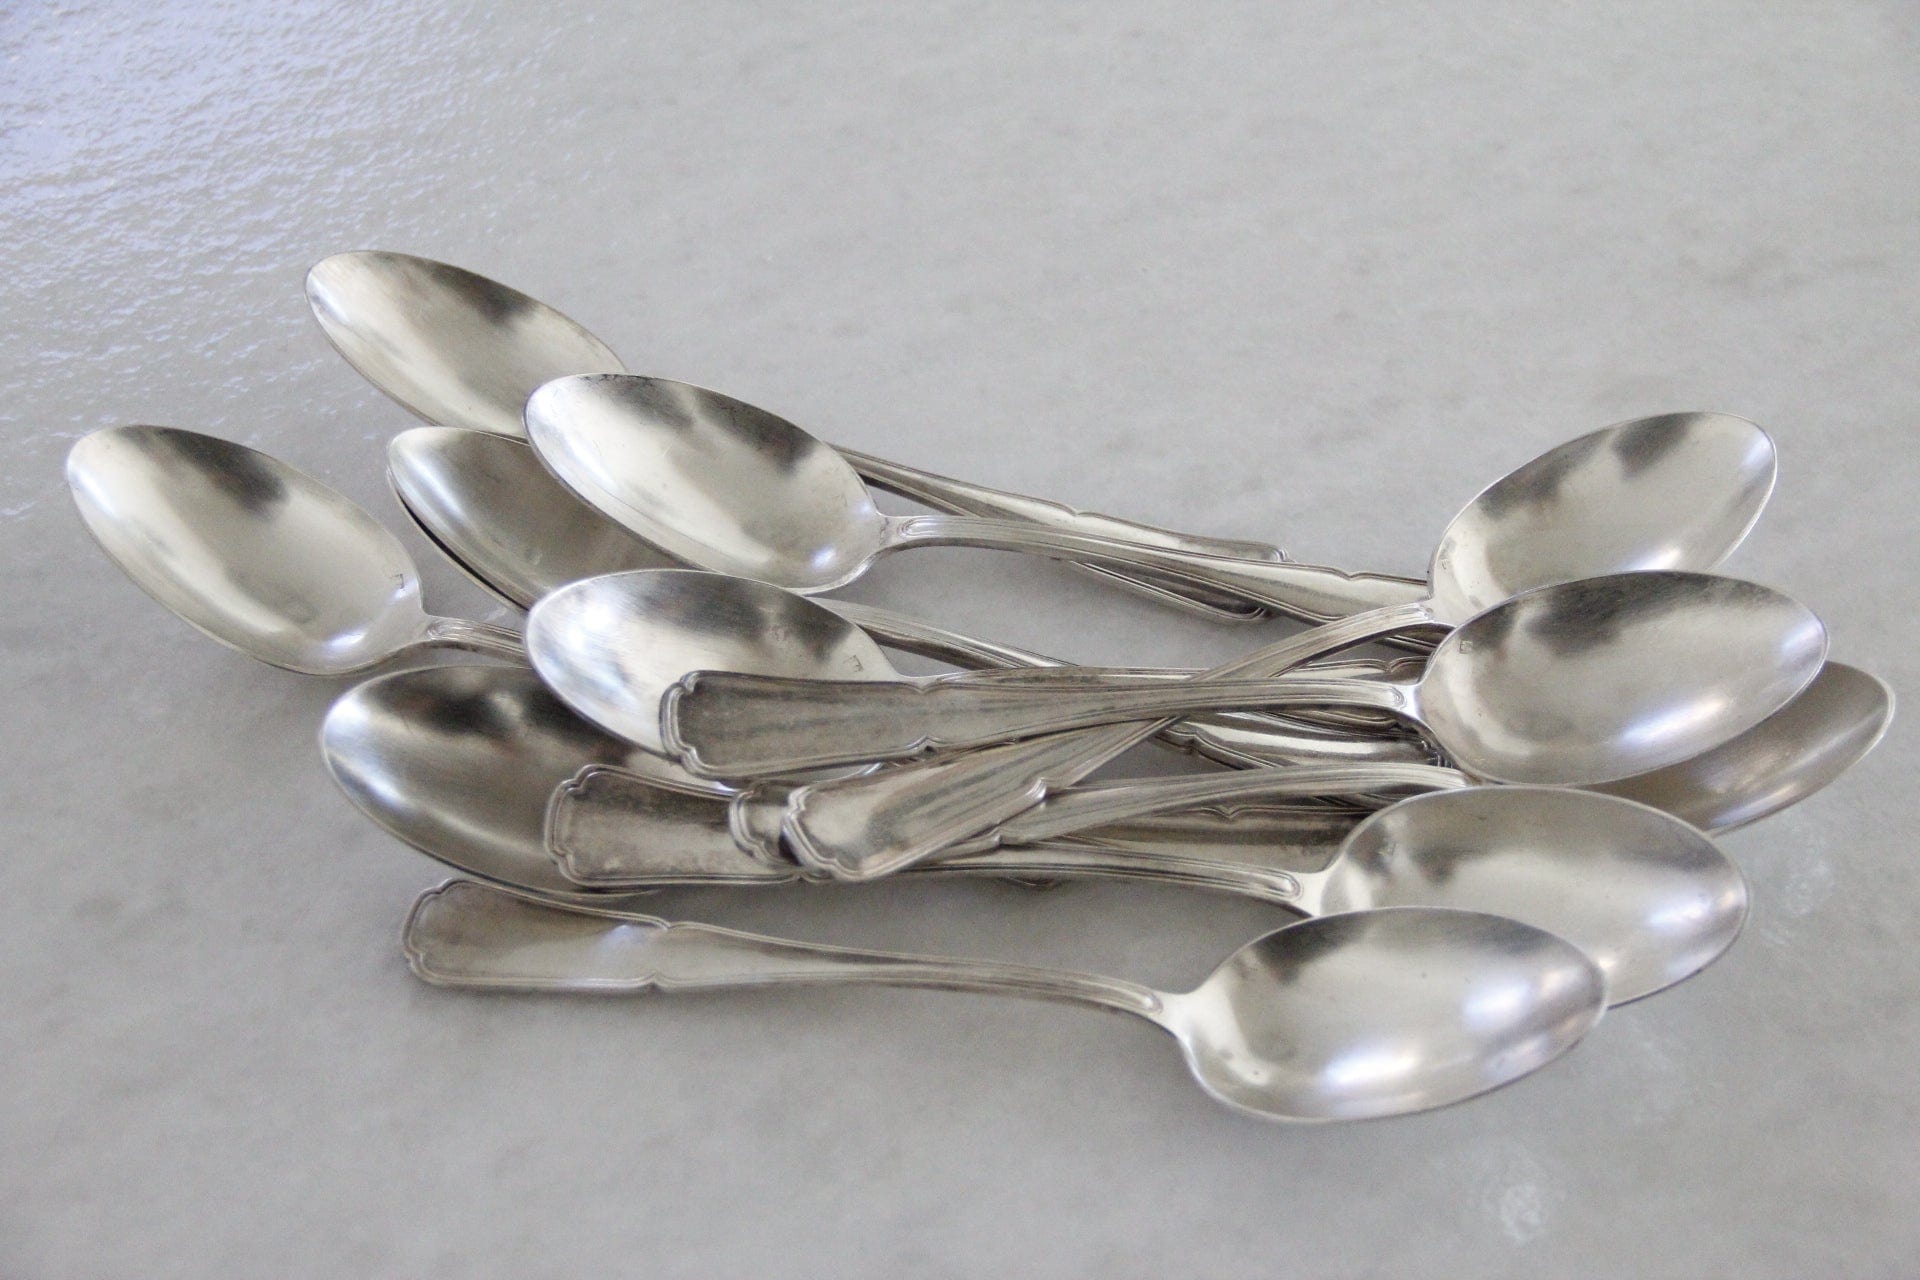 Antique French Silver Tablespoon Serving Spoon | Flatware 4 Pcs. Tableware